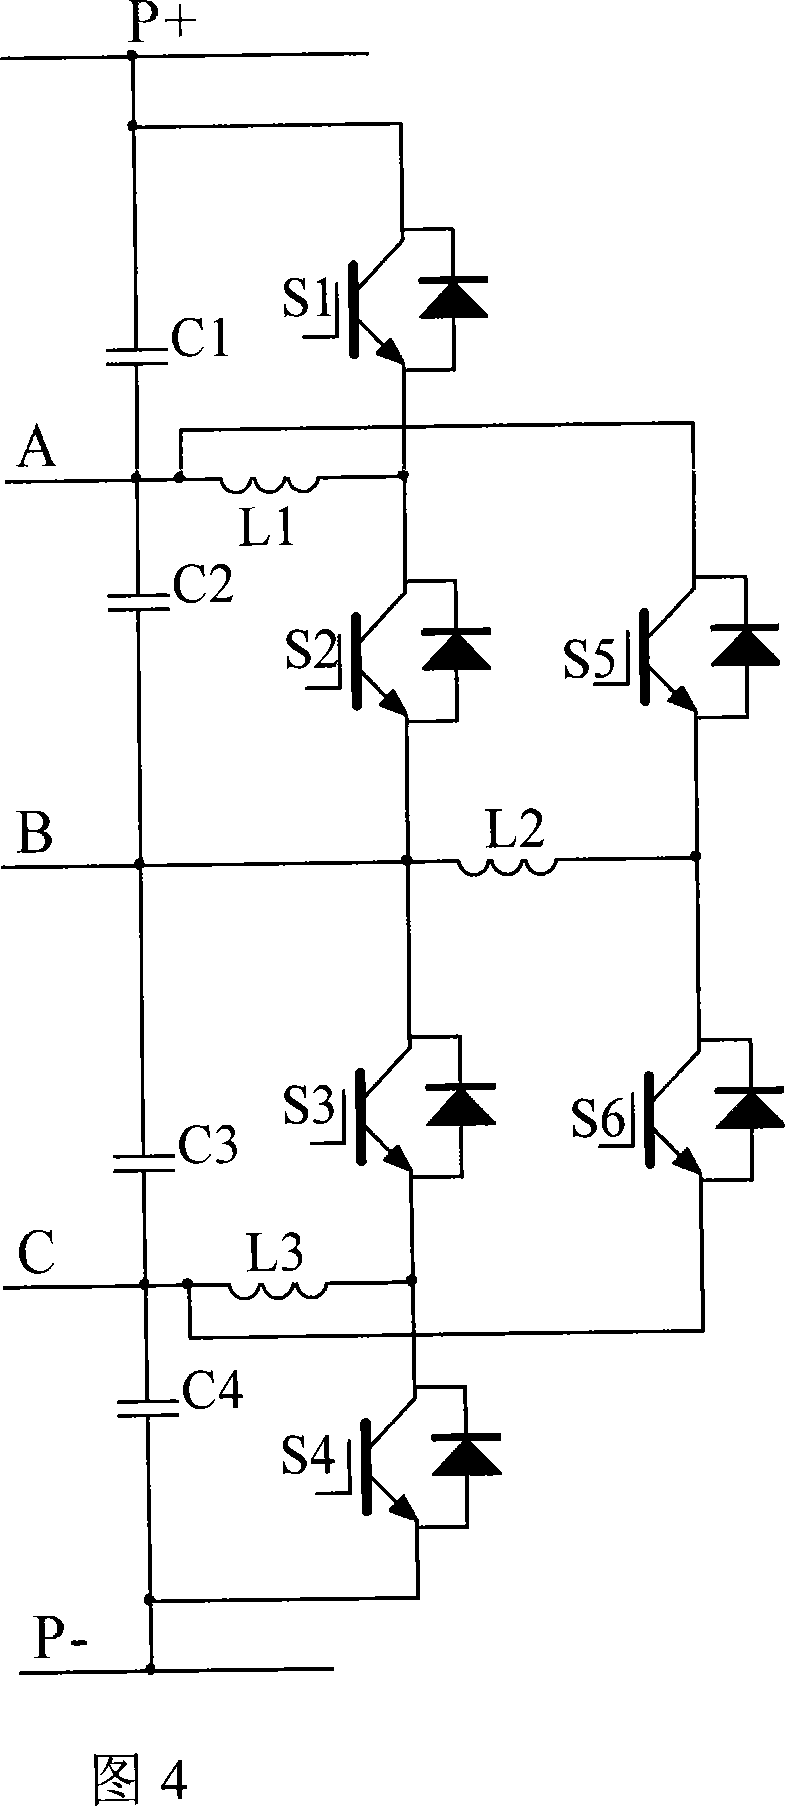 A five-level high-voltage frequency converter